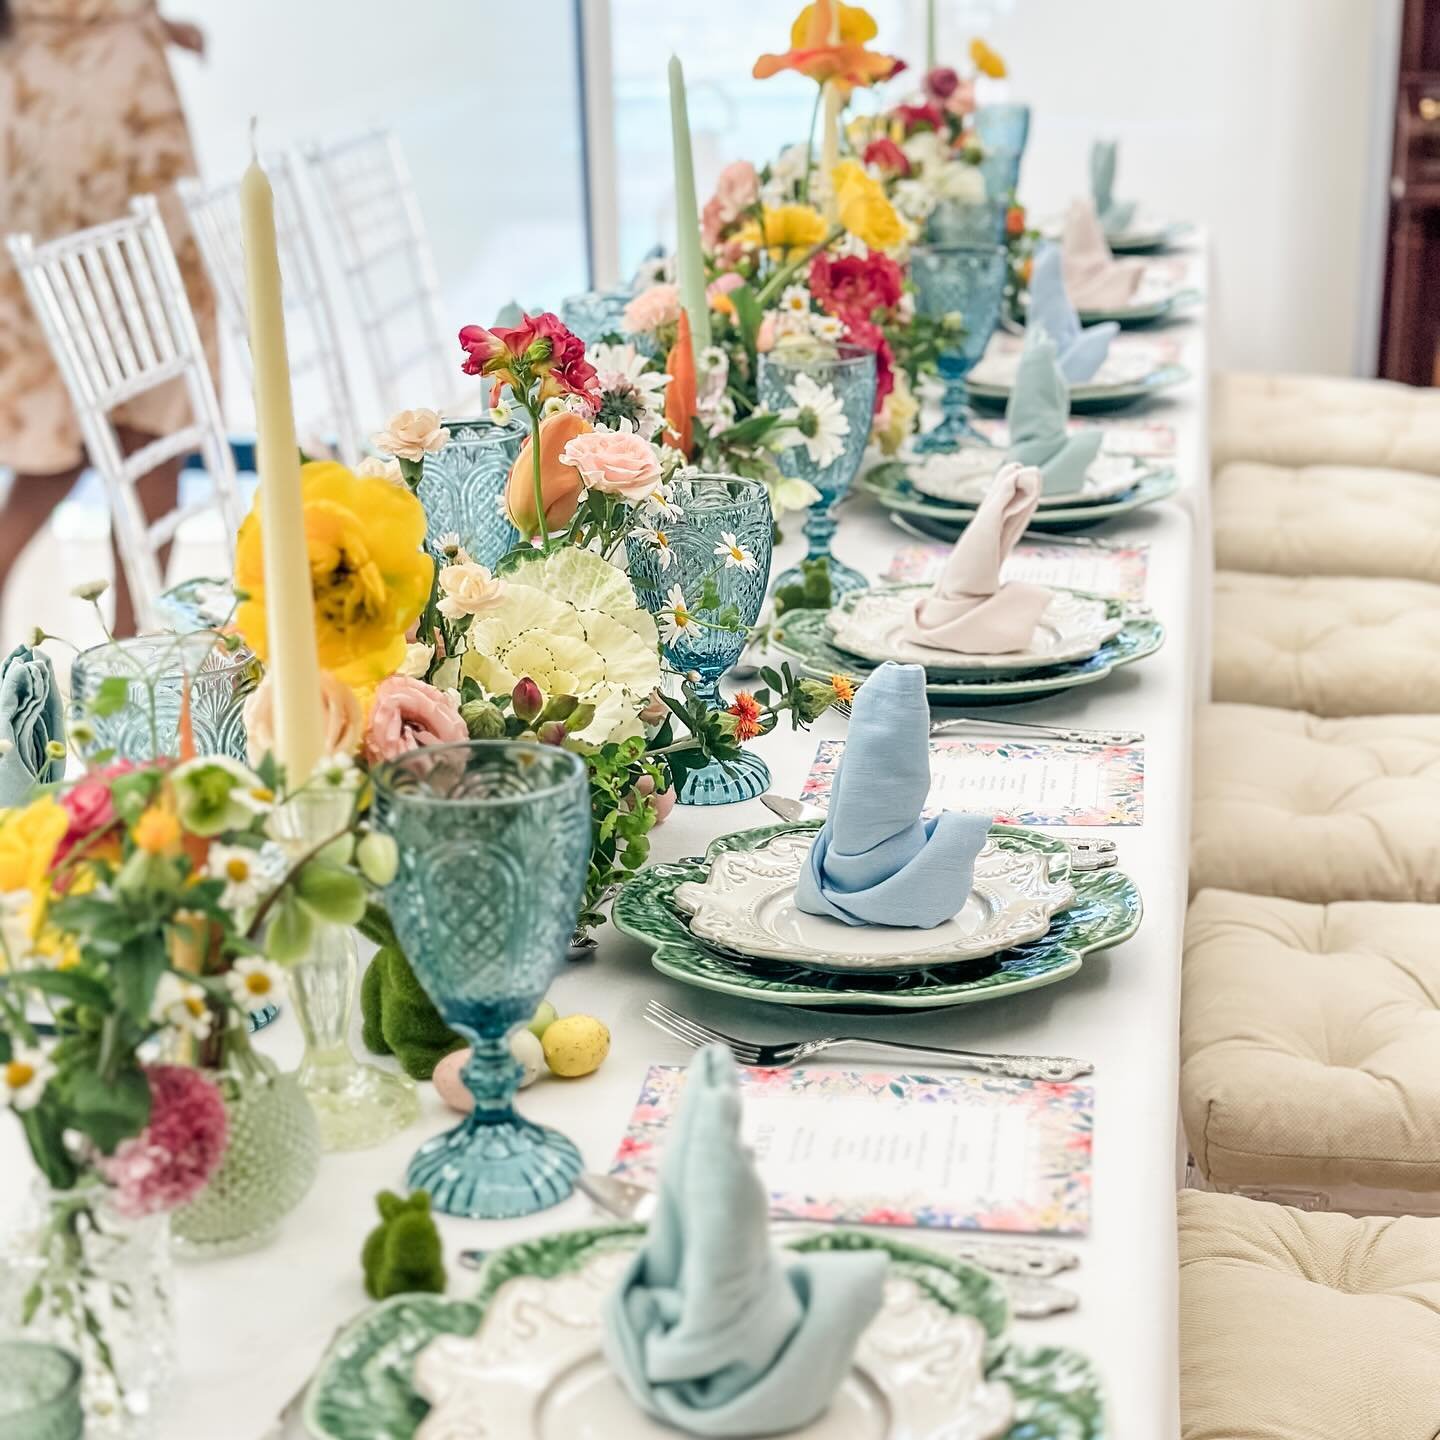 Embrace the essence of spring with our beautifully styled table perfect  for Mother&rsquo;s Day brunch! Adorned with fresh flowers, delicate pastel linens, and exquisite tableware such as Bordallo Pinheiro cabbage plates and vintage-inspired glasswar